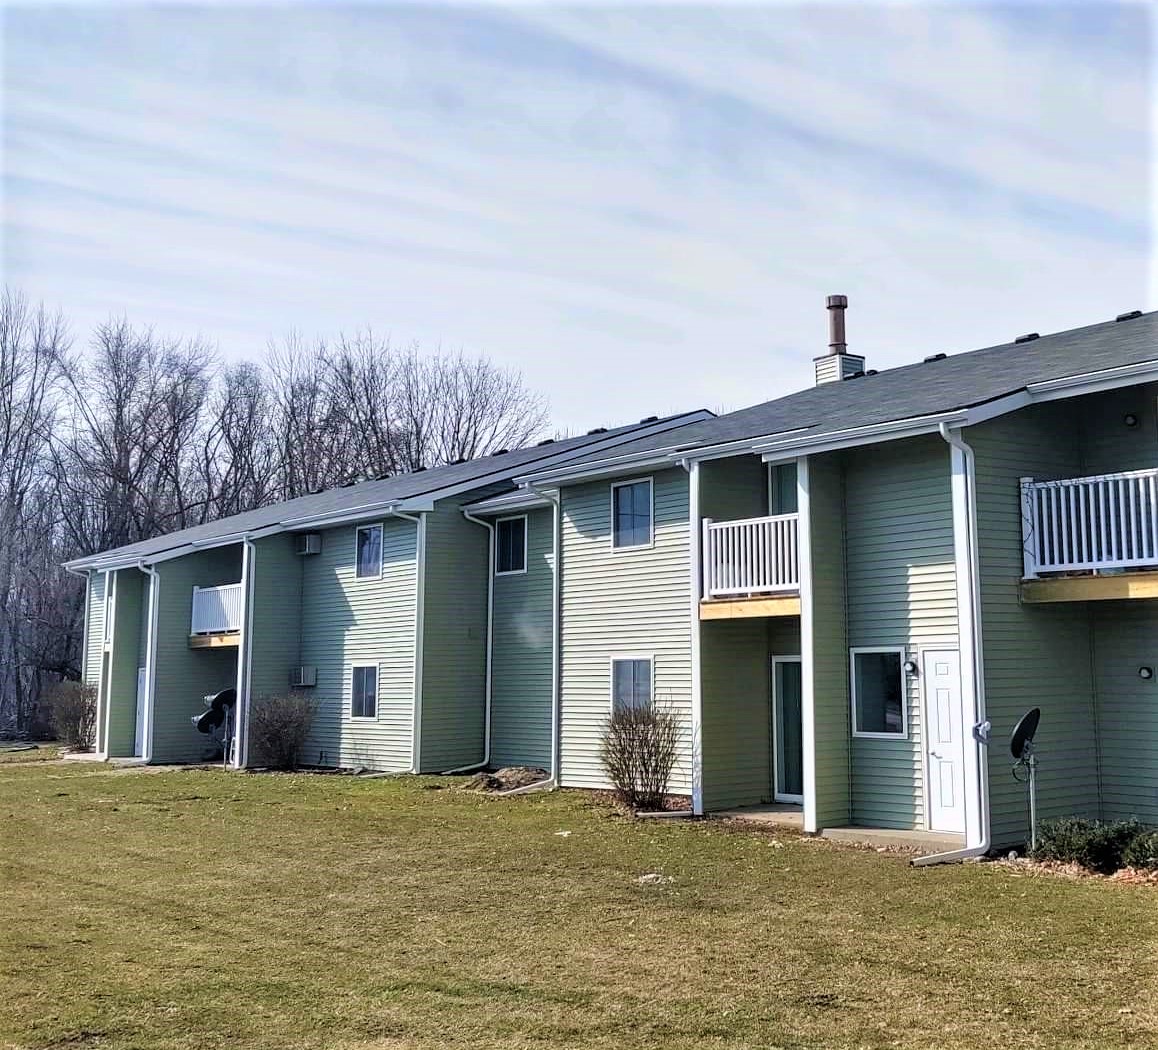 Photo of CENTER STREET (IN HARTFORD). Affordable housing located at 520 S CTR ST HARTFORD, MI 49057